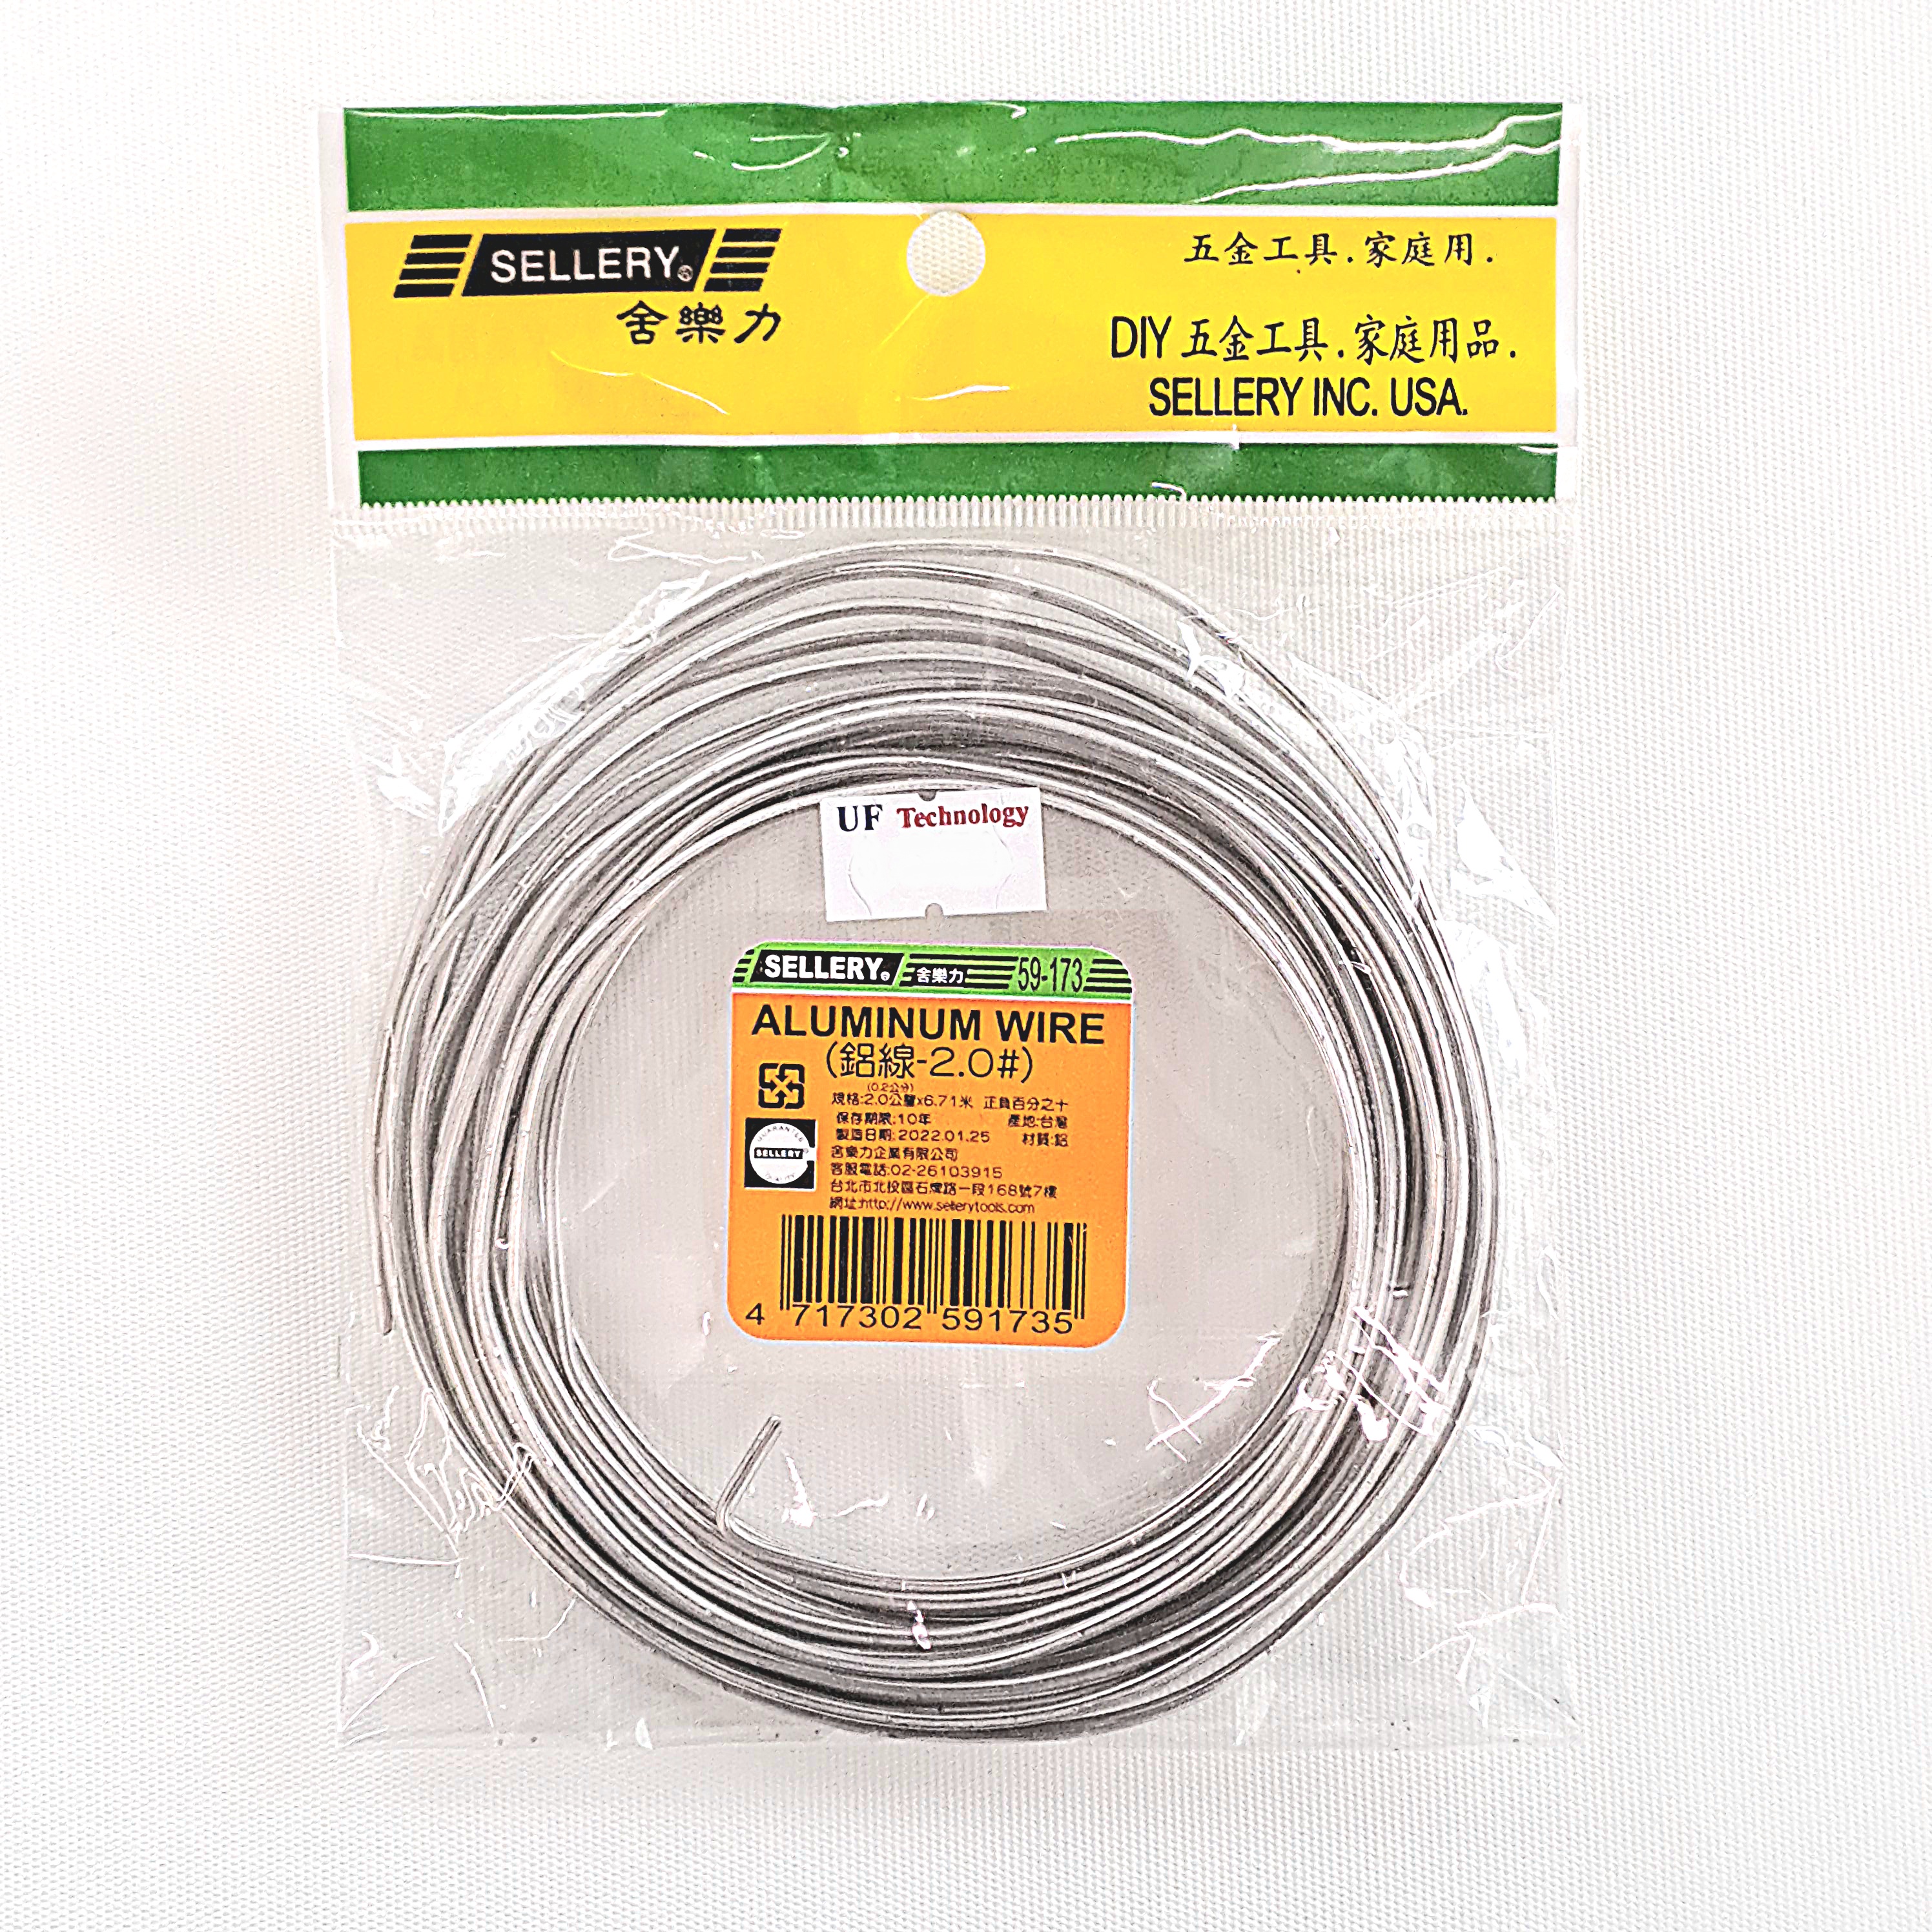 Sellery 59-173 Aluminium Wire, Size: 2mm x 22FT